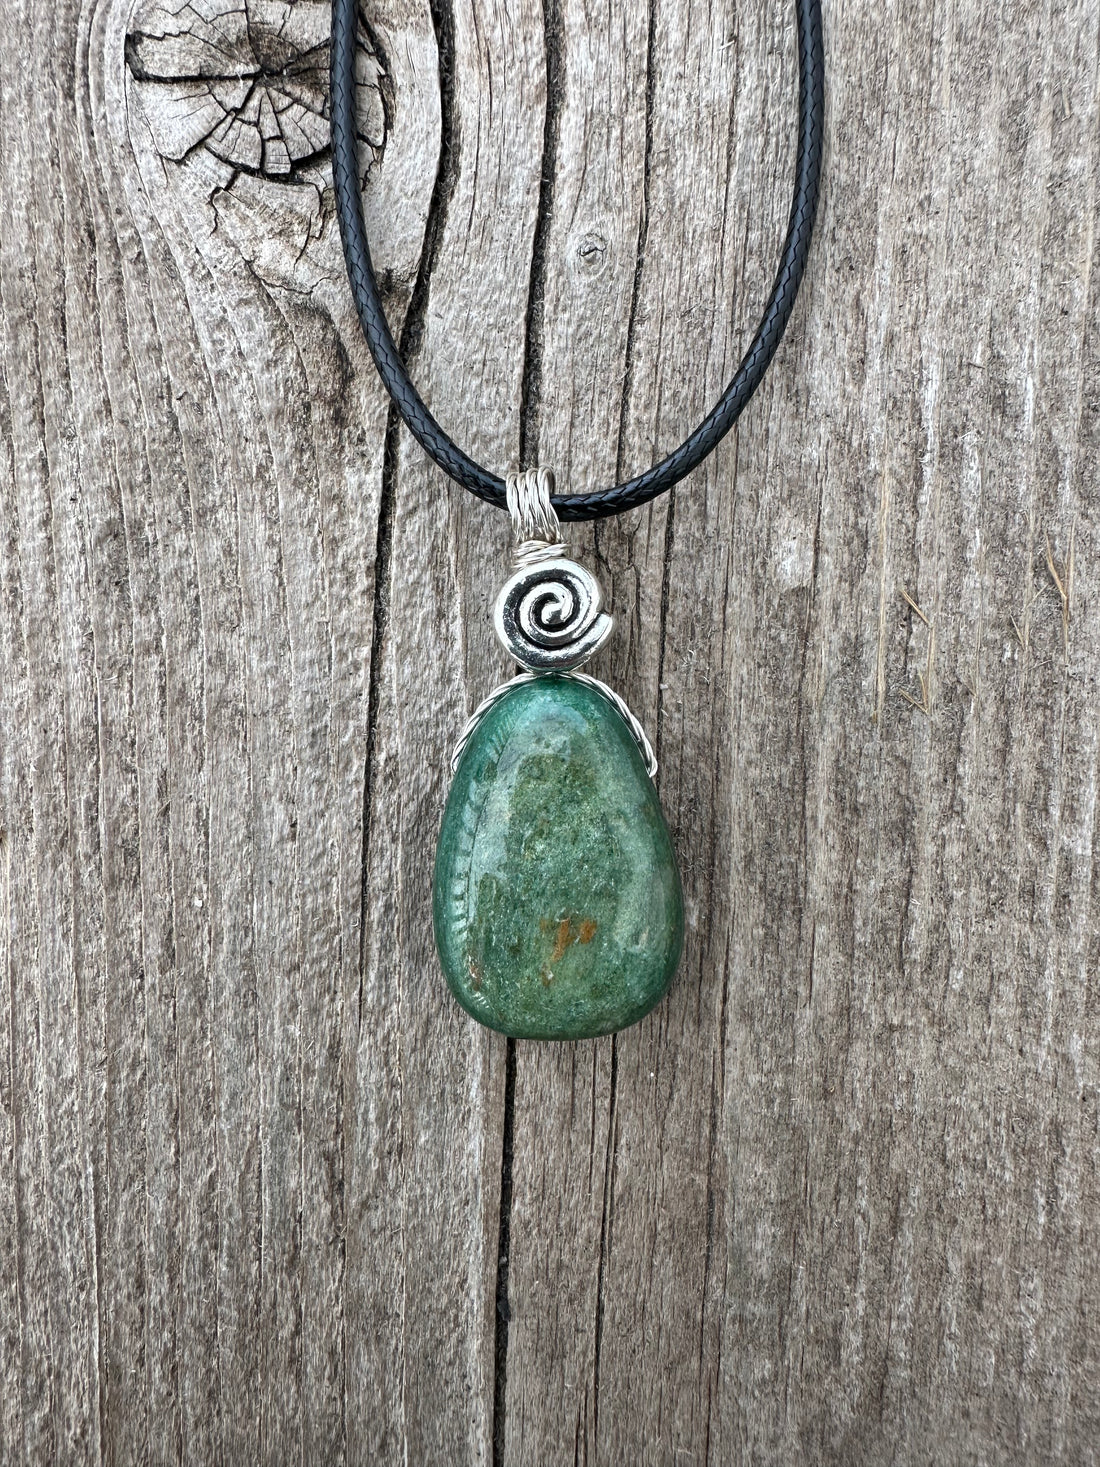 Fuchsite for Knowledge, New Patterns and Releasing Martyrdom. Swirl to Signify Consciousness.